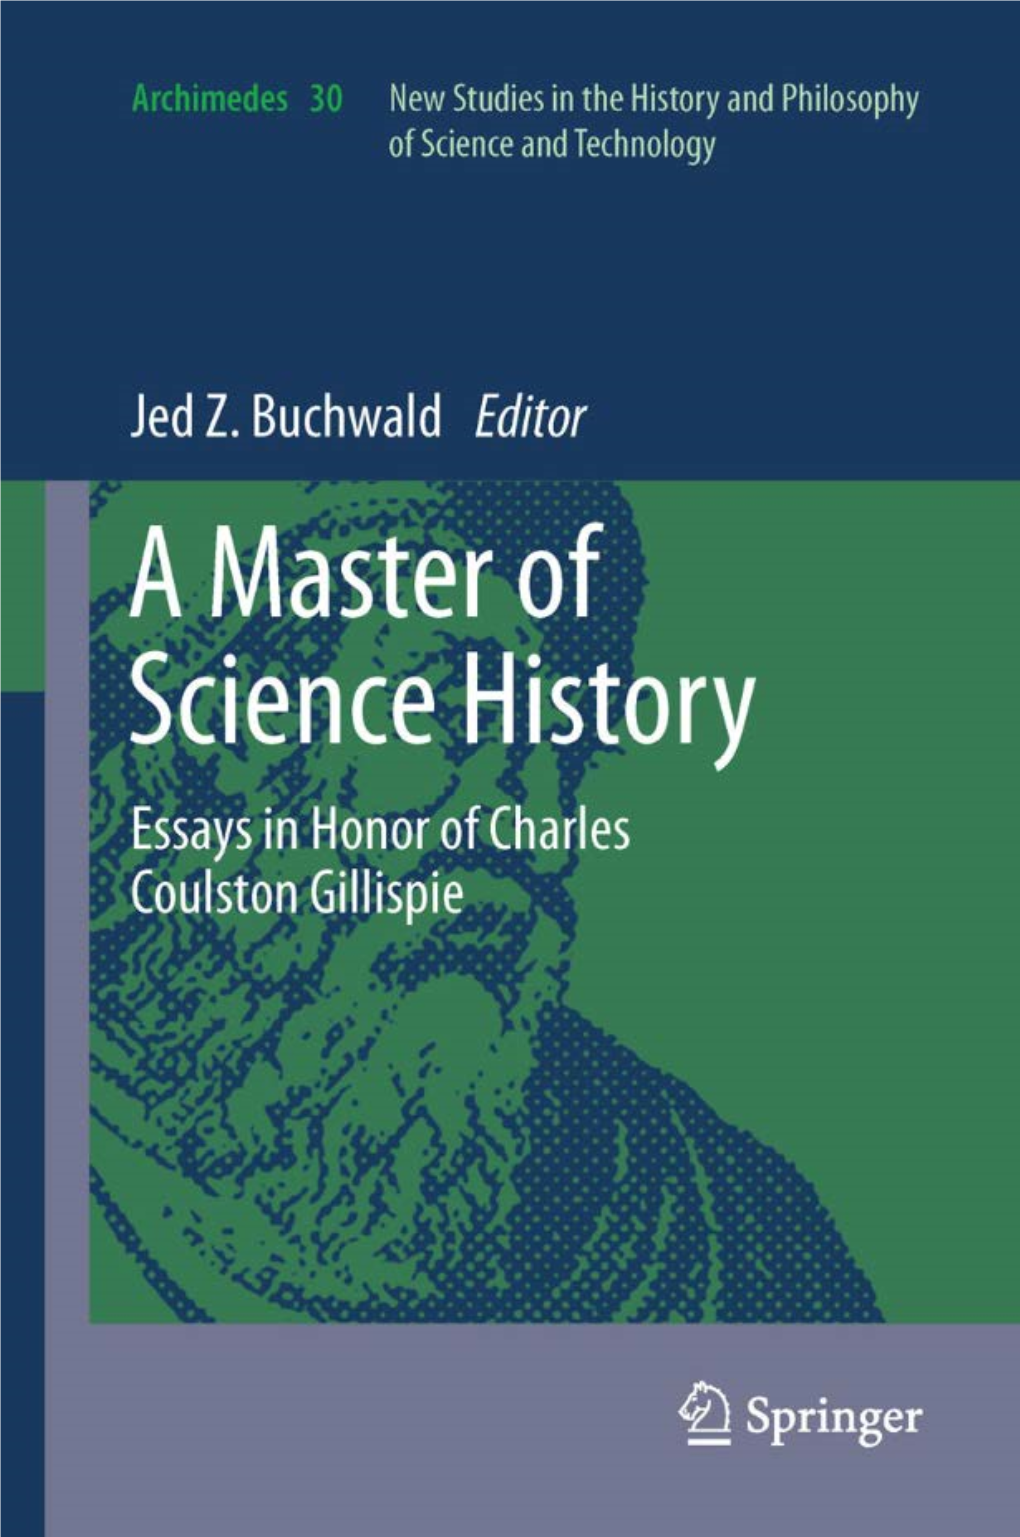 A Master of Science History (2012)